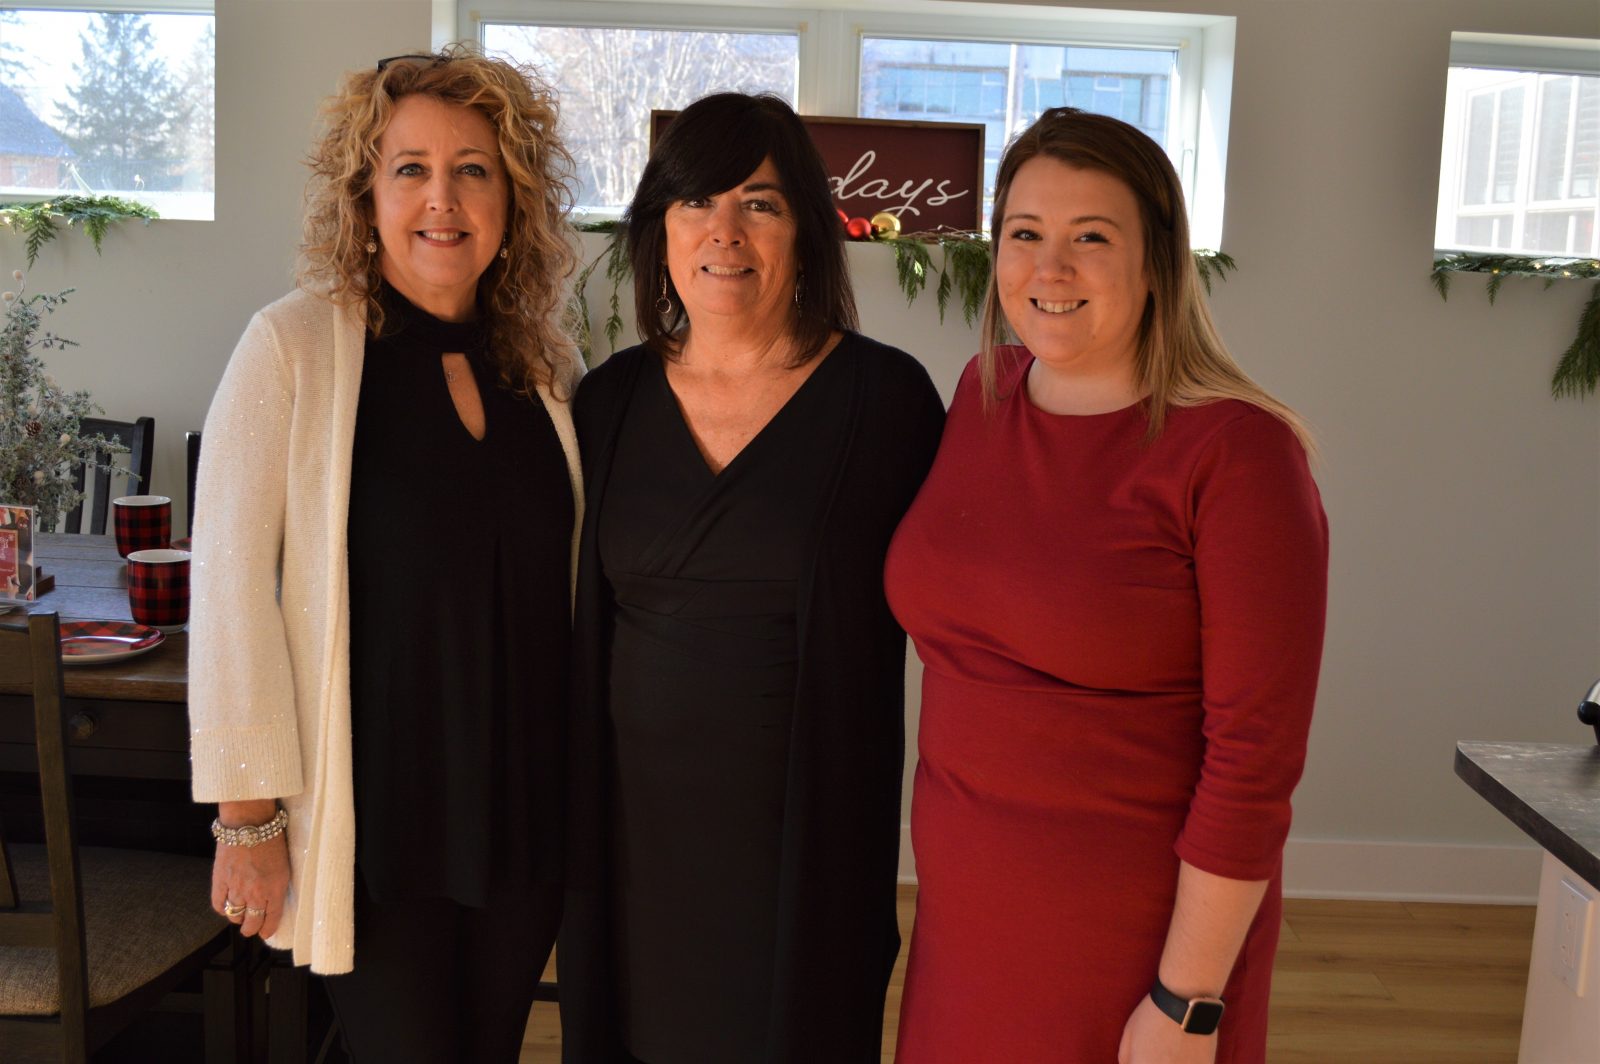 Home for the Holidays supports Maison Baldwin House